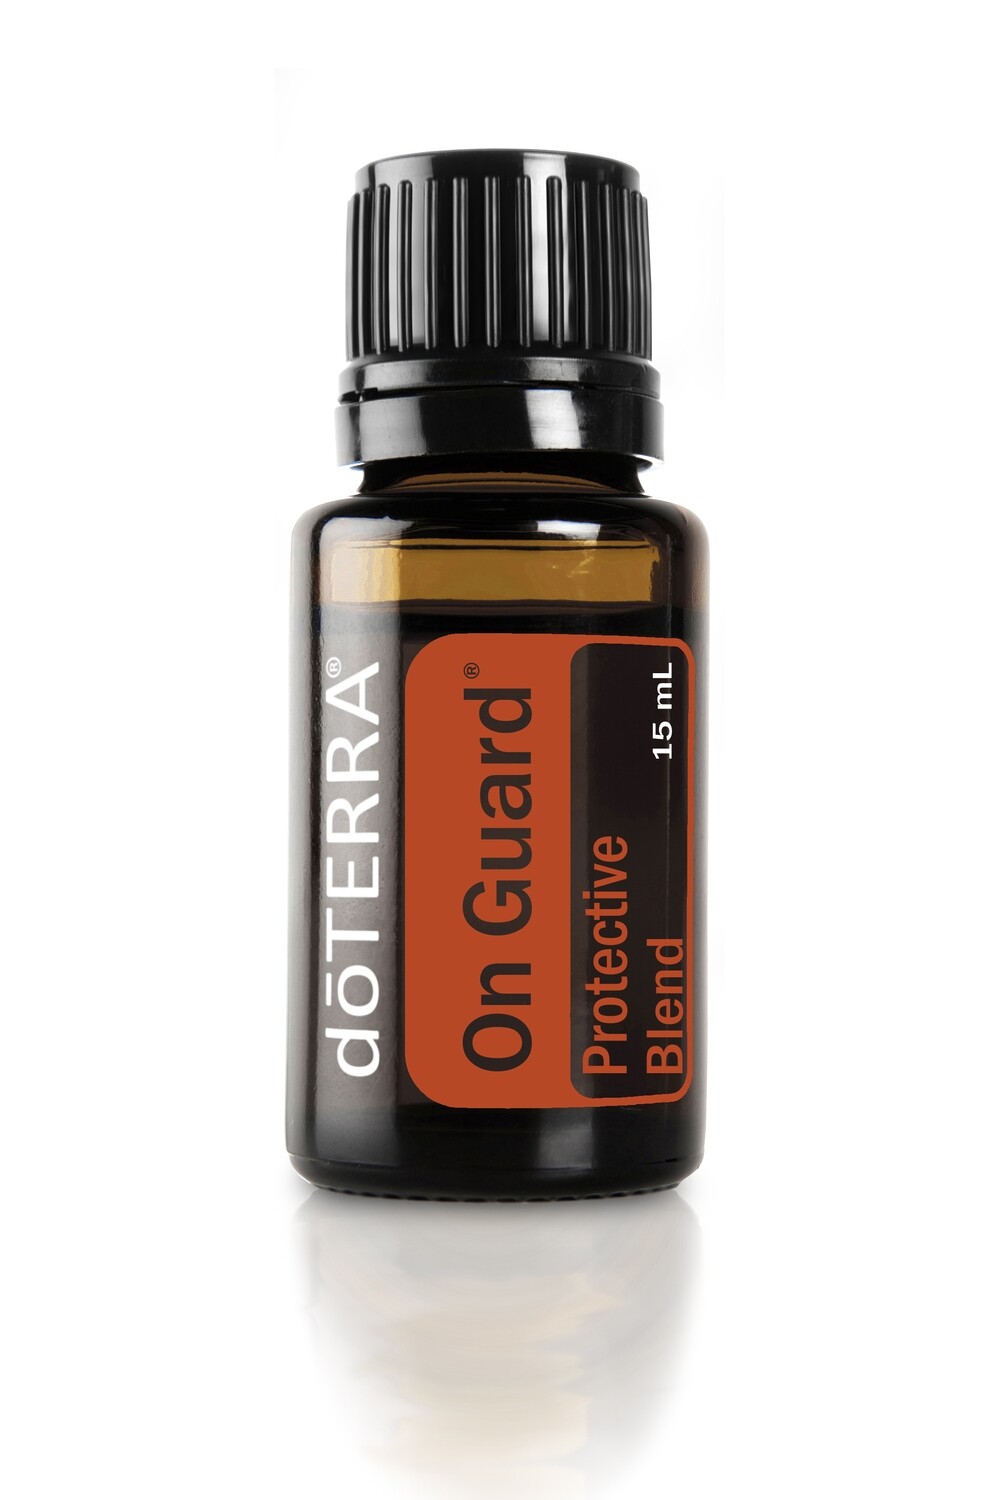 OnGuard Essential Oil Blend